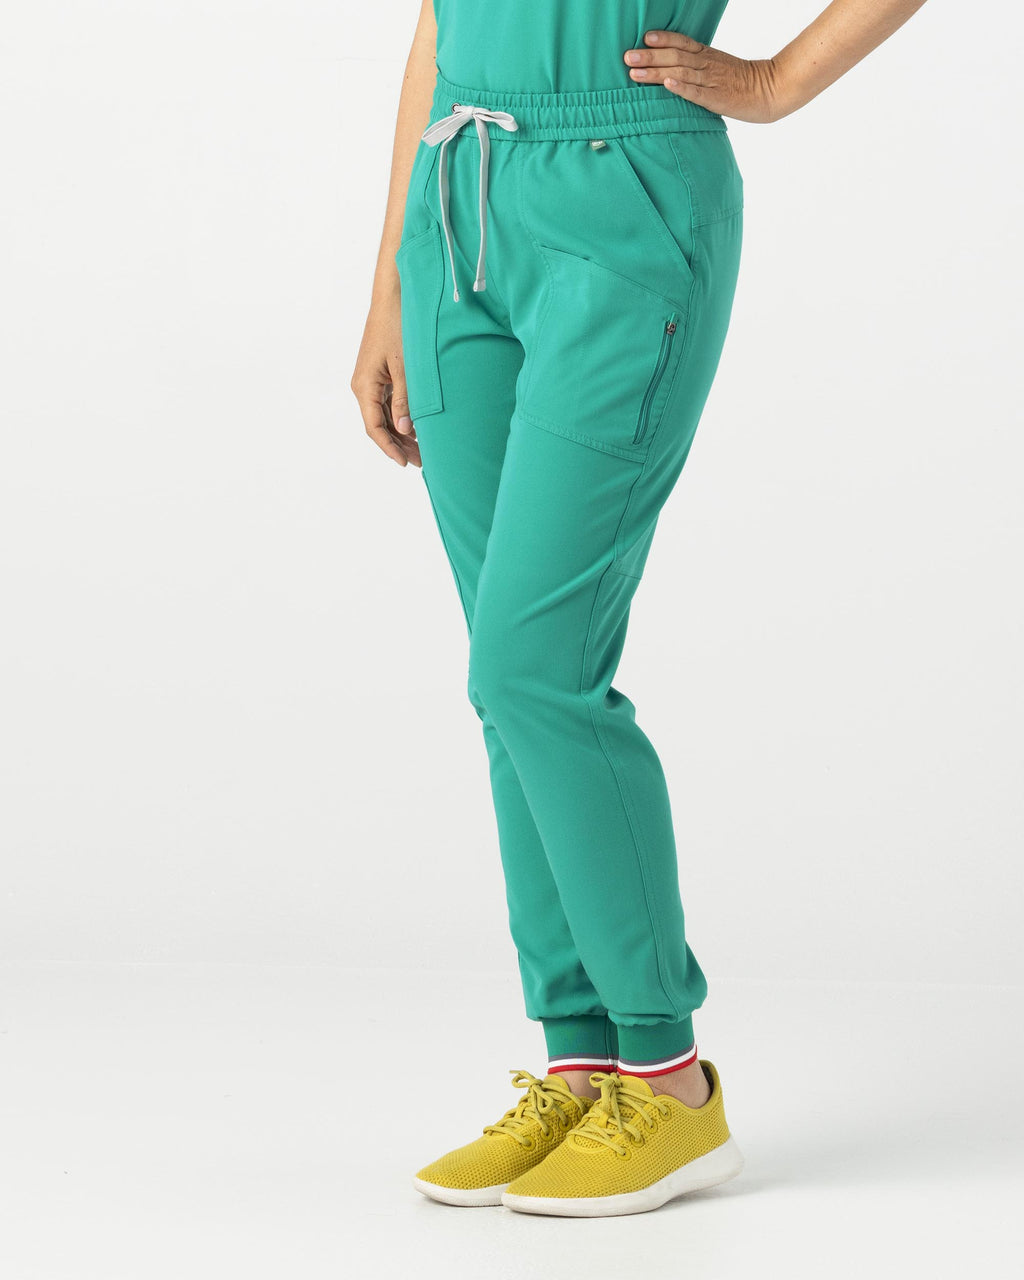 Women's Scrubs  Jogger Pants for Nurses and Medical Professionals – Folds  Wear